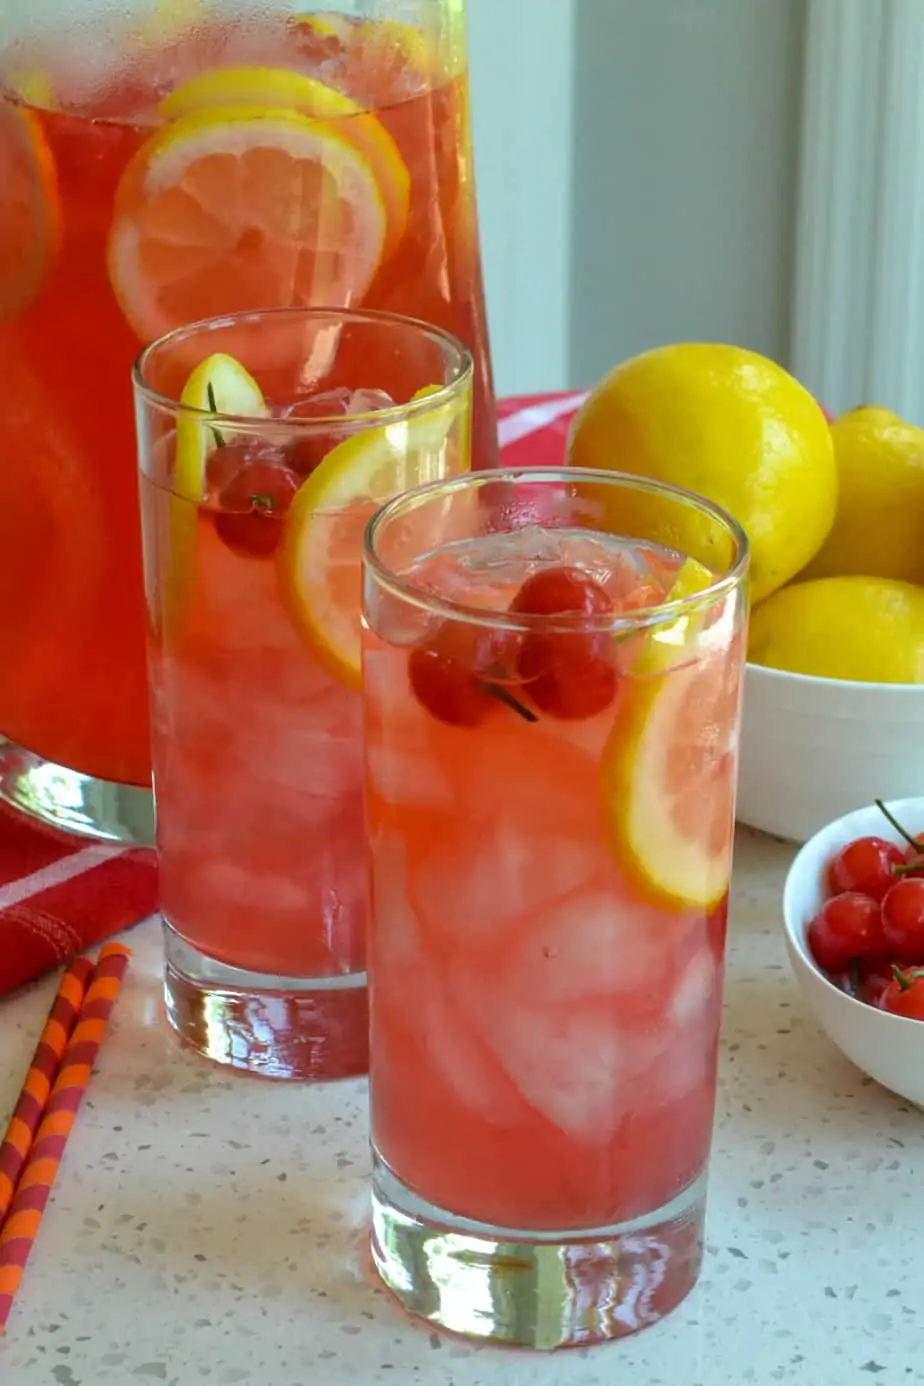 Cool and refreshing Cherry Lemonade is made with all-natural ingredients like freshly squeezed lemons, sun-ripened sour cherries, sugar, and filtered water.